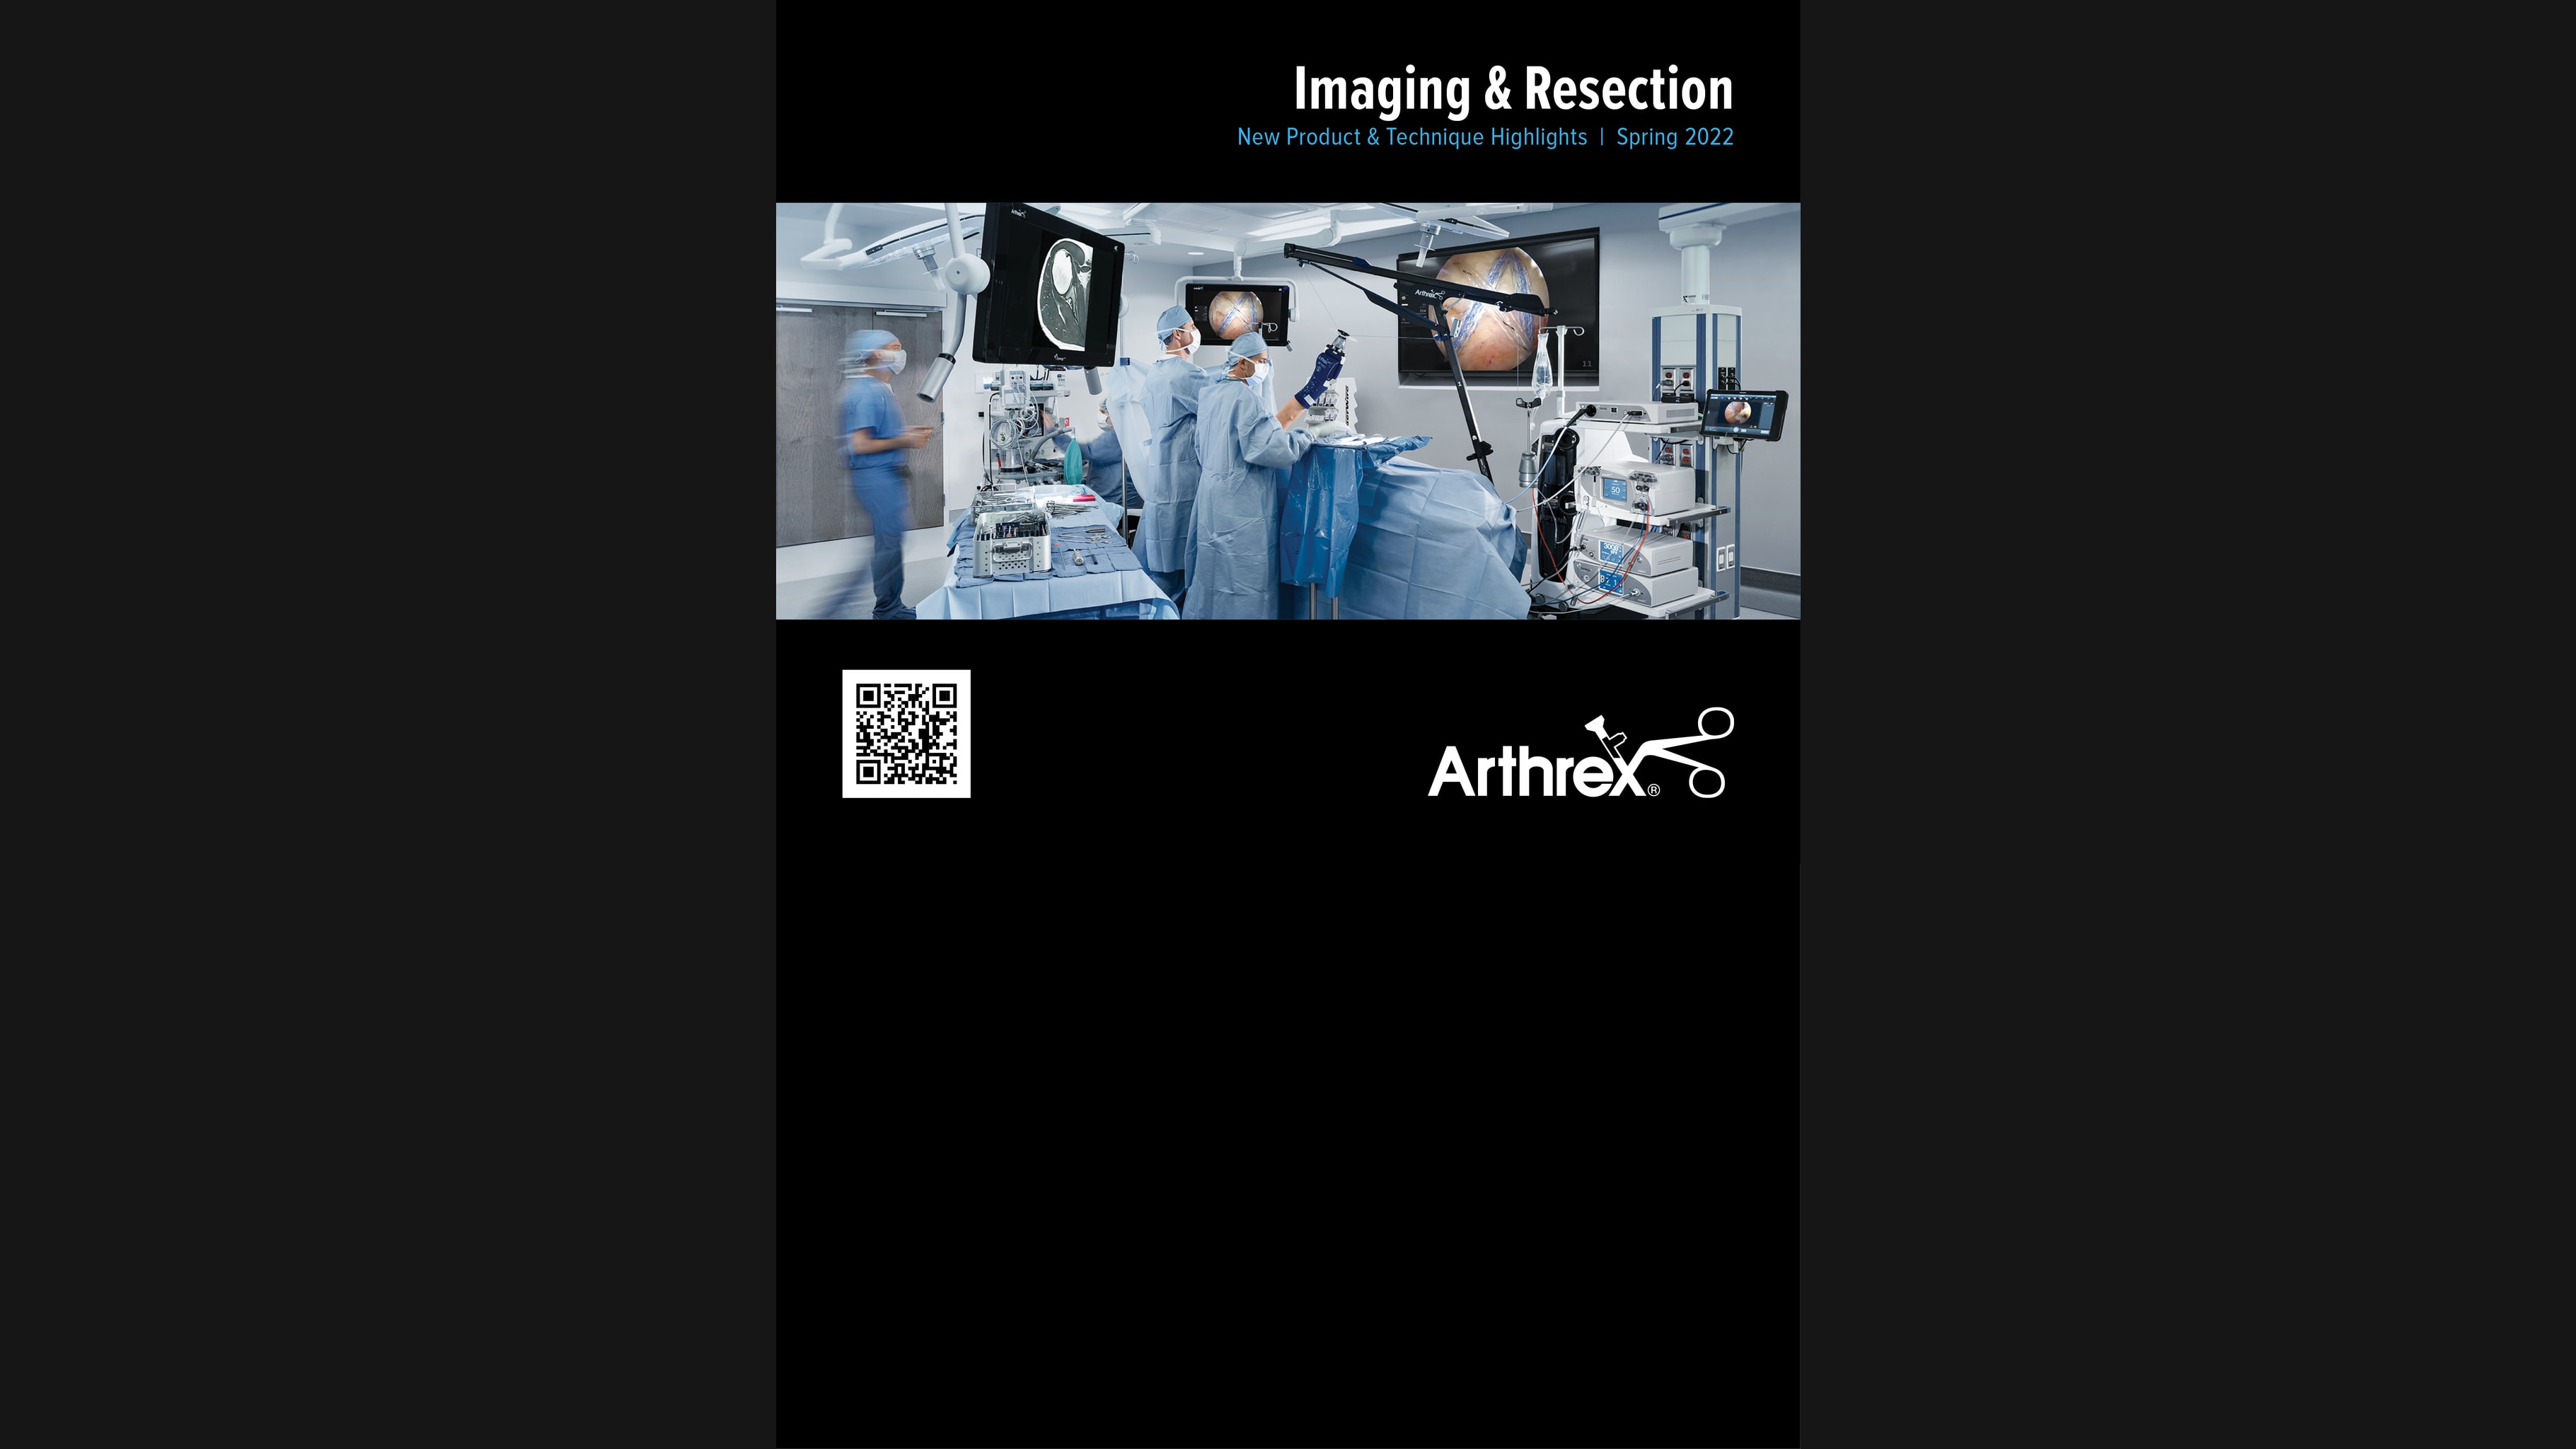 Imaging & Resection: New Product & Technique Highlights